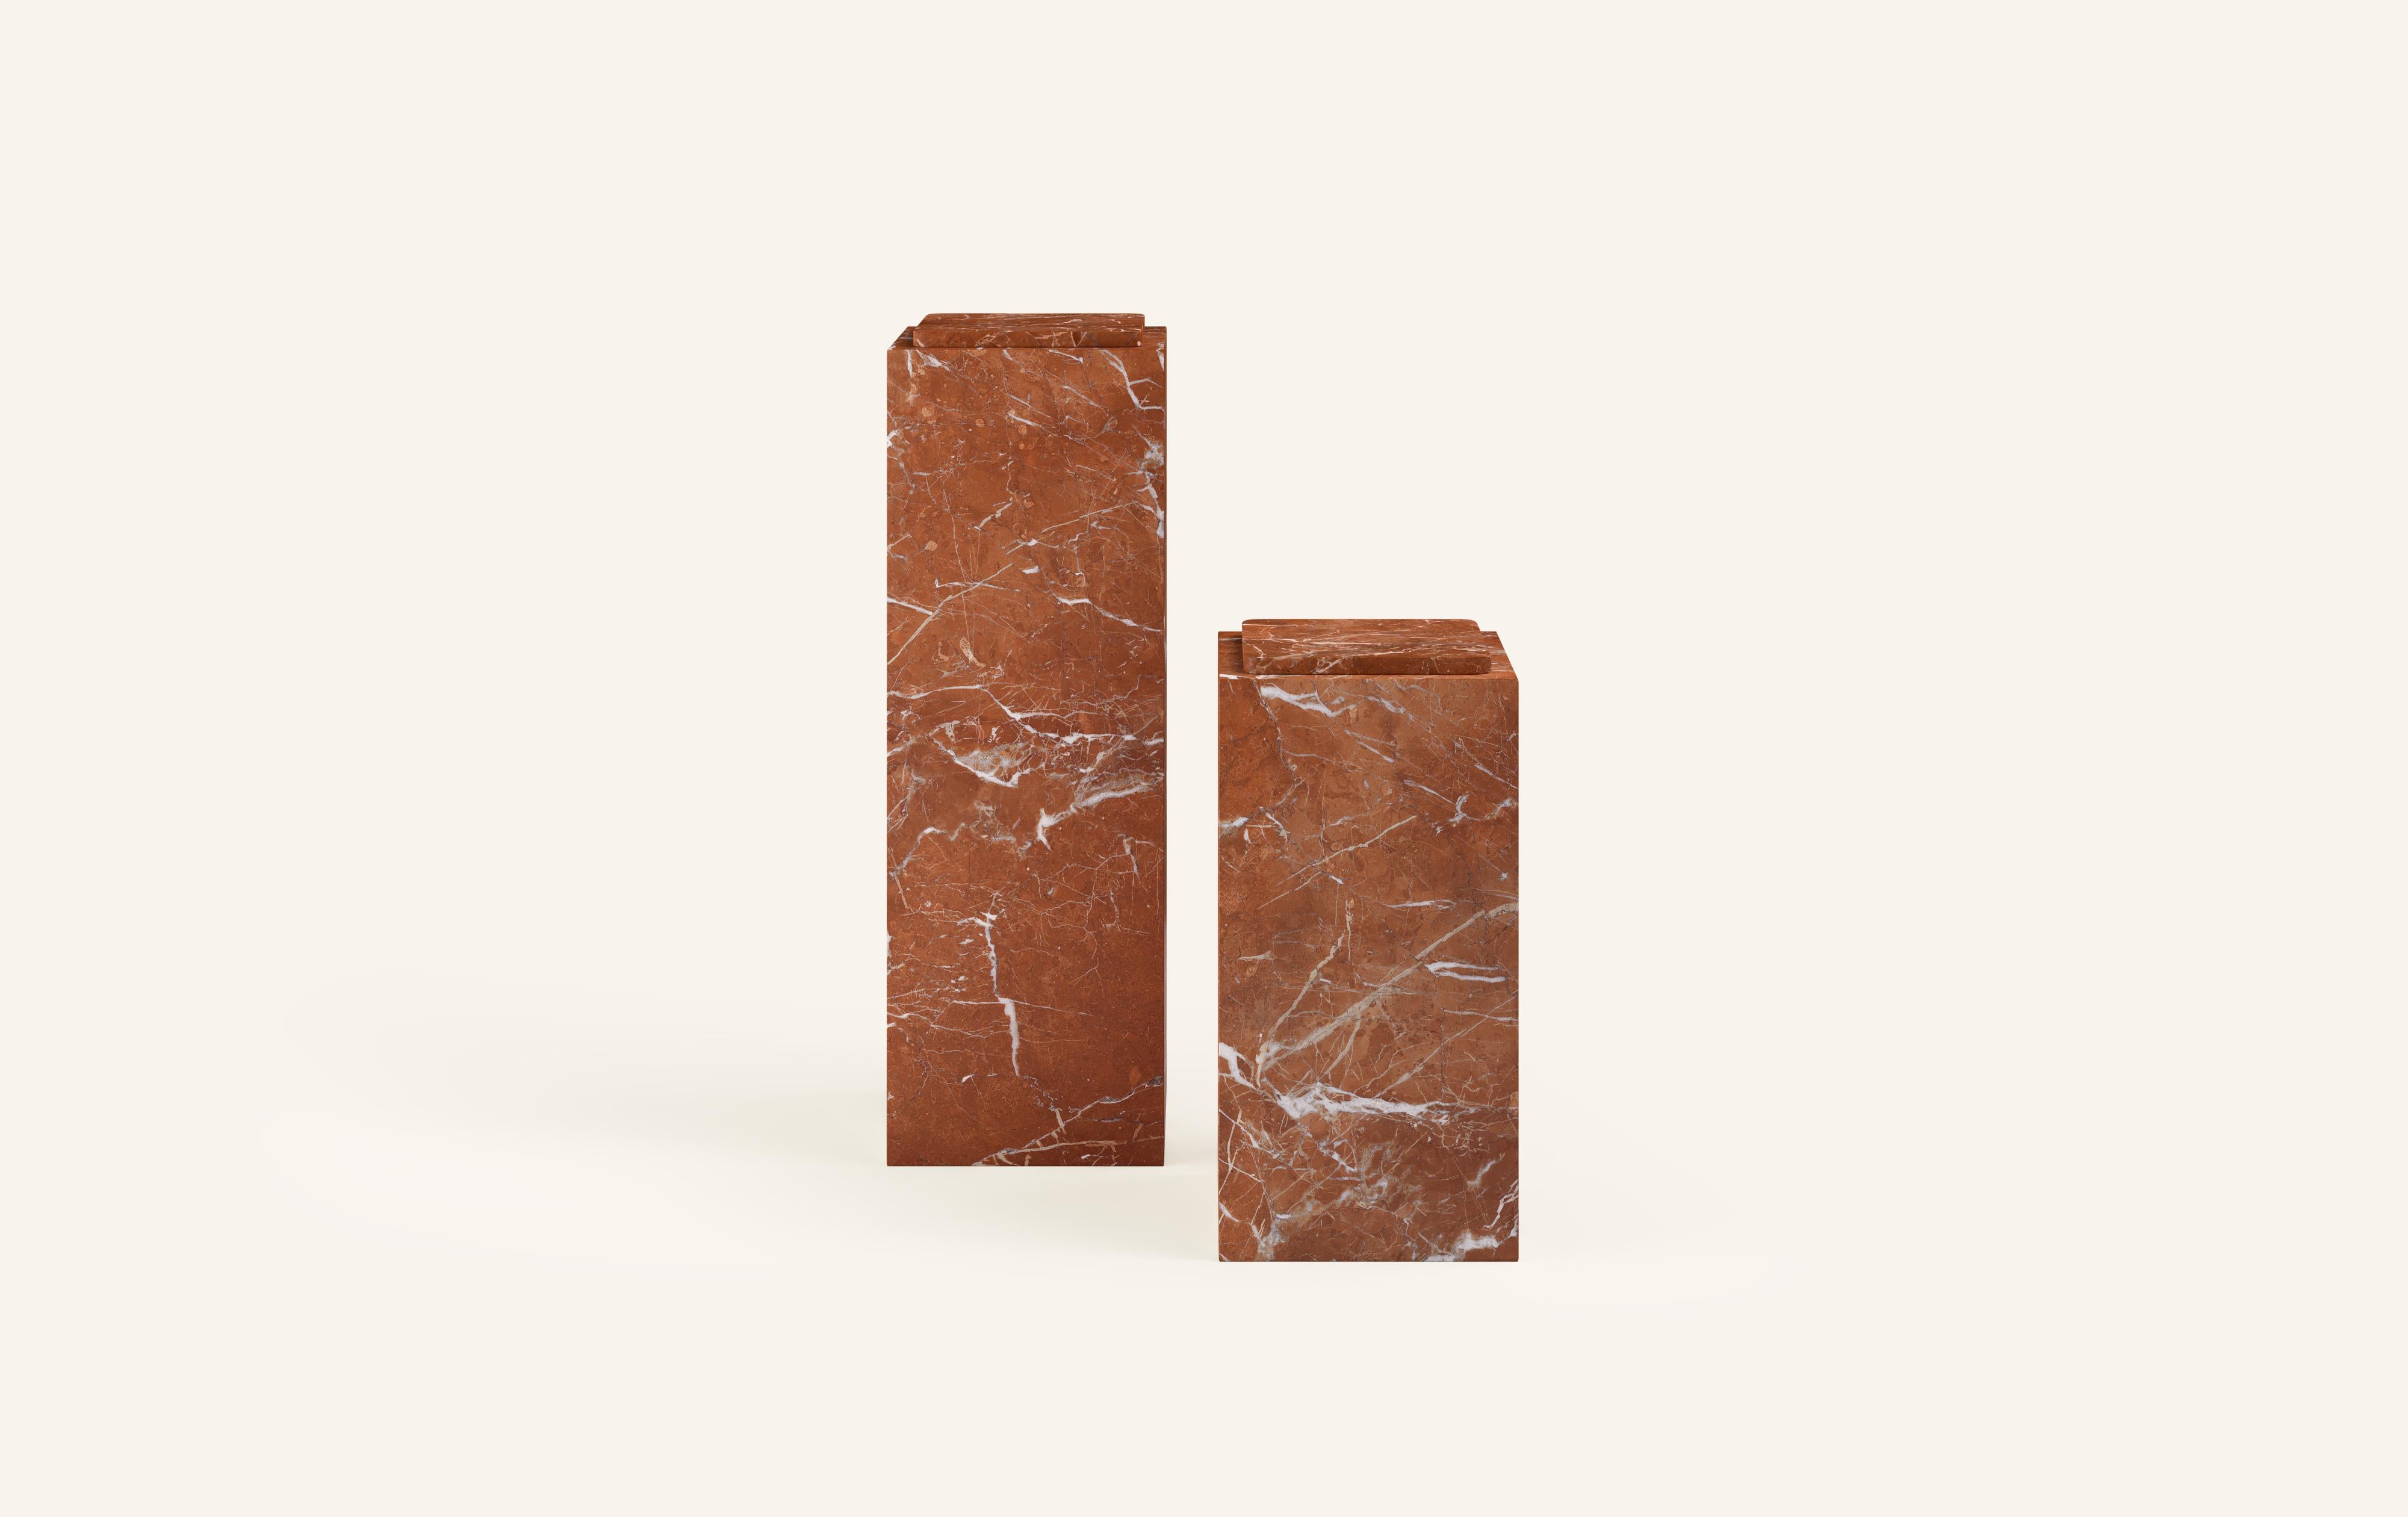 MONOLITHIC FORMS SOFTENED BY GENTLE EDGES. WITH ITS BOLD MARBLE PATTERNS CUBO IS AS VERSATILE AS IT IS STRIKING.

DIMENSIONS (PEDESTALS SOLD INDIVIDUALLY):
12”L x 12”W x 36”H: 
- 3/4